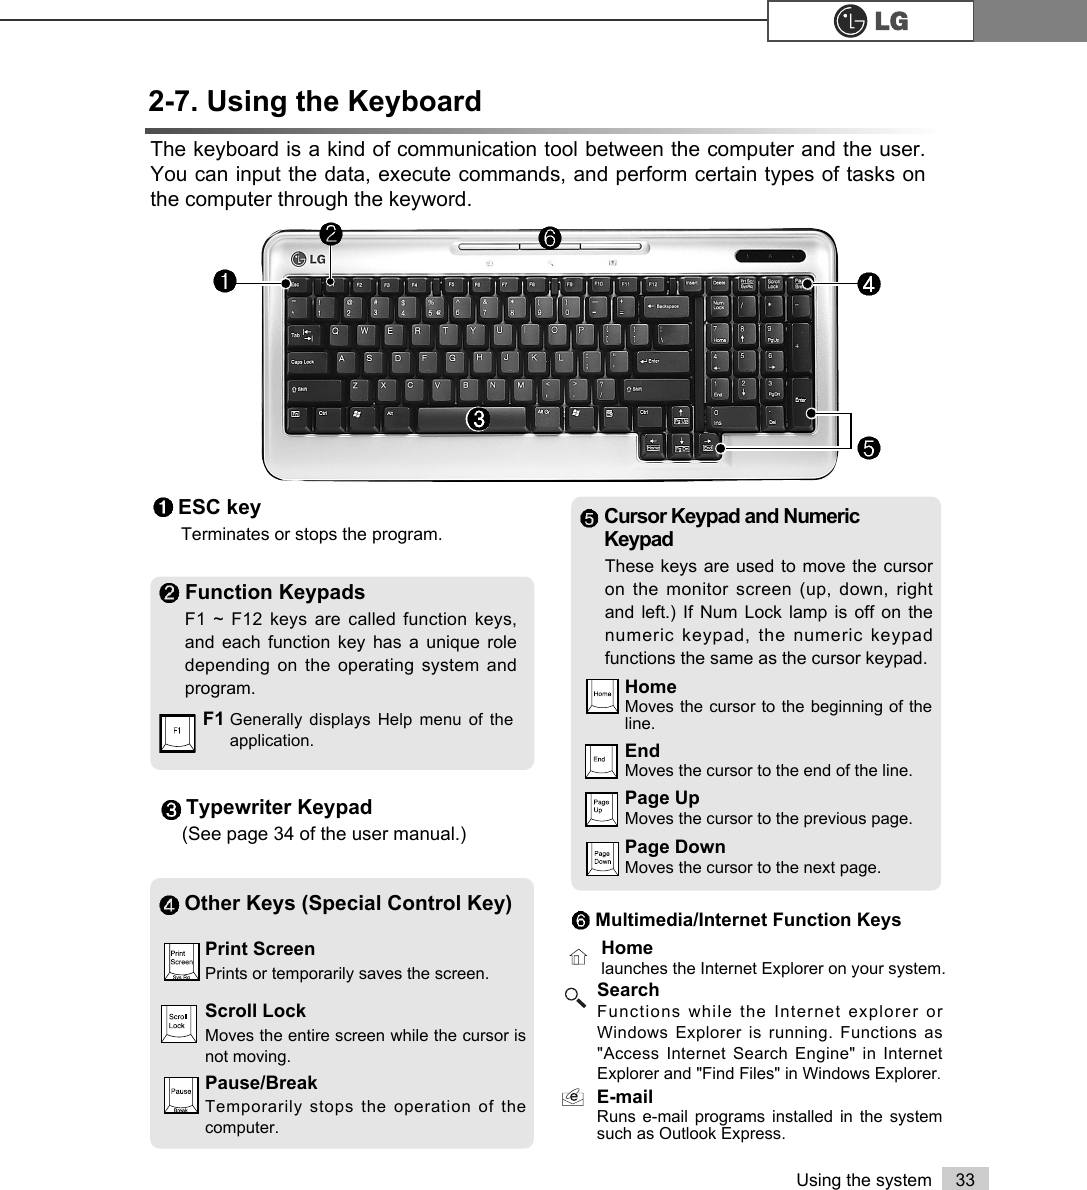 33Using the system2-7. Using the KeyboardThe keyboard is a kind of communication tool between the computer and the user.You can input the data, execute commands, and perform certain types of tasks onthe computer through the keyword.Typewriter Keypad(See page 34 of the user manual.) ESC keyTerminates or stops the program.Other Keys (Special Control Key)Scroll LockMoves the entire screen while the cursor isnot moving.Print ScreenPrints or temporarily saves the screen.Pause/BreakTemporarily stops the operation of thecomputer.Function KeypadsF1 ~ F12 keys are called function keys,and each function key has a unique roledepending on the operating system andprogram.F1 Generally displays Help menu of theapplication.Multimedia/Internet Function KeysCursor Keypad and NumericKeypadThese keys are used to move the cursoron the monitor screen (up, down, rightand left.) If Num Lock lamp is off on thenumeric keypad, the numeric keypadfunctions the same as the cursor keypad.EndMoves the cursor to the end of the line.HomeMoves the cursor to the beginning of theline.Page UpMoves the cursor to the previous page.Page DownMoves the cursor to the next page.Homelaunches the Internet Explorer on your system.SearchFunctions while the Internet explorer orWindows Explorer is running. Functions as&quot;Access Internet Search Engine&quot; in InternetExplorer and &quot;Find Files&quot; in Windows Explorer.E-mailRuns e-mail programs installed in the systemsuch as Outlook Express.